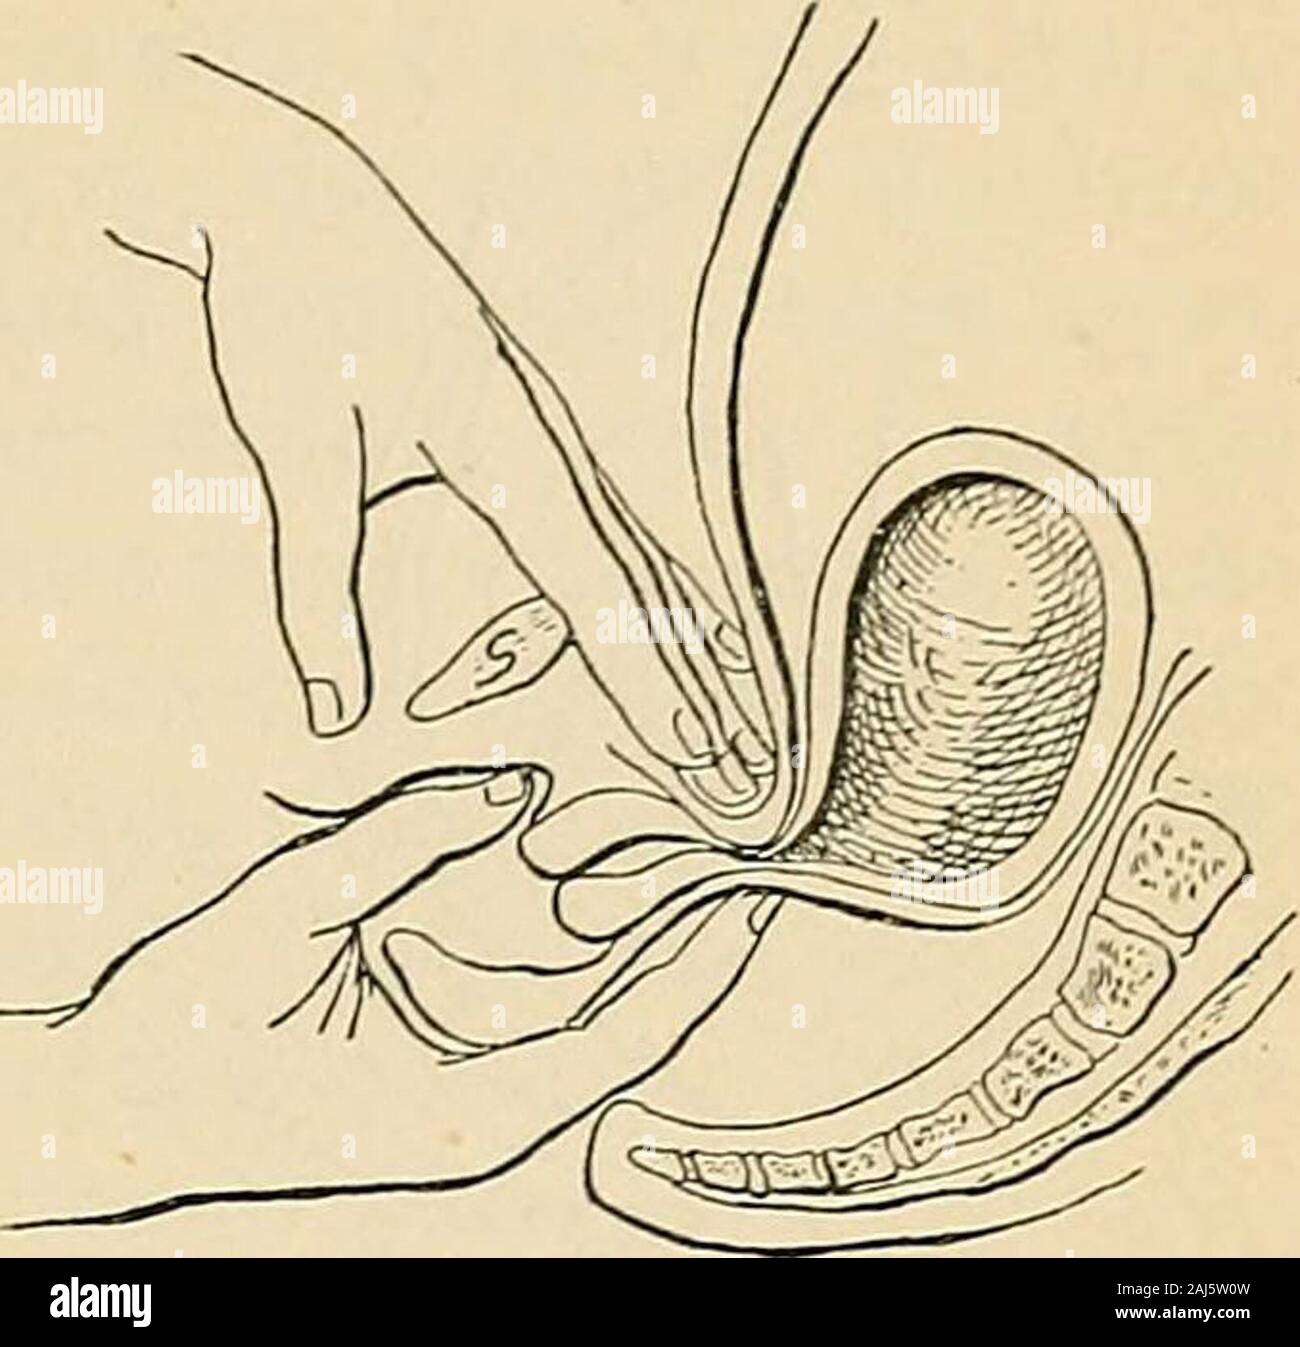 A manual of obstetrics . her conditions causing local rise of tem-perature are—i. Vaginitis; 2. Congestive diseases of thepelvic viscera. (5) Goo dells Sign.— Velvety softness of the cervix uteriis a truly valuable, although not absolutely diagnostic,sign of gestation, resulting from the edema of the tissuesof the cervix. It may be present as early as the second orthird week of pregnancy. Professor Goodell formulateda so-called ready rule of practice as follows : When the cer-vix is as hard as the tip of ones nose pregnancy presumablydoes not exist, but if it be as soft as ones lips, the exist Stock Photo